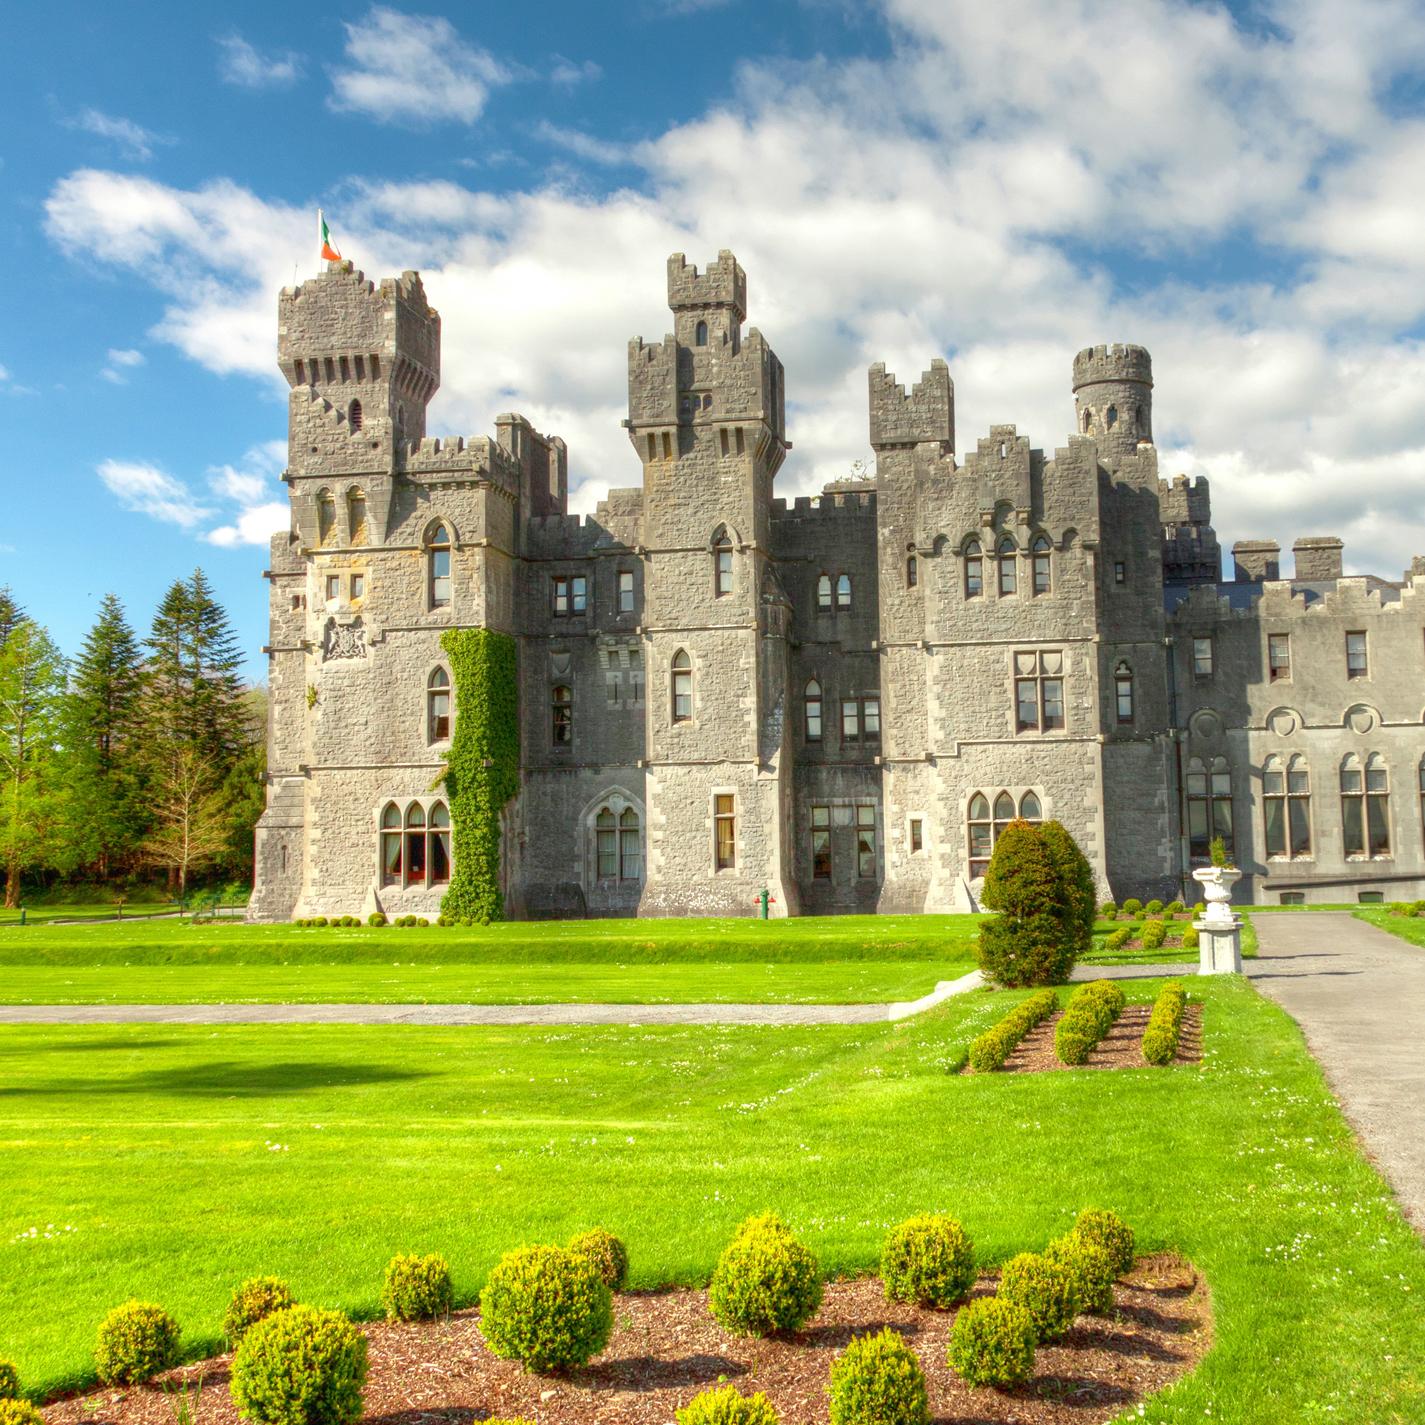 Experience castles and historic sites with CIE Tours